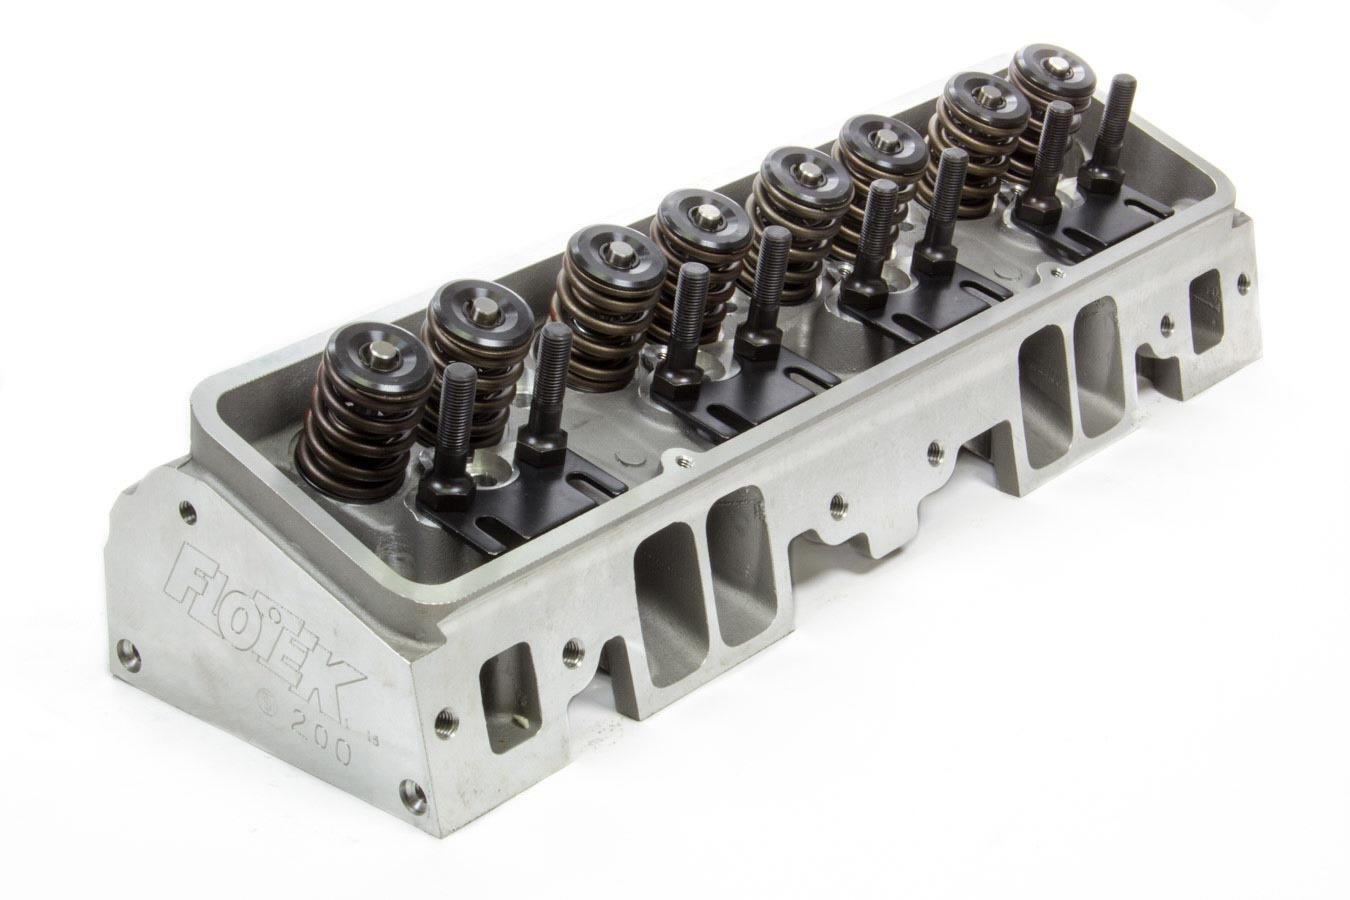 Flo Tek 1200-HRAC-505A Cylinder Head, Assembled, 2.020 / 1.600 in Valves, 200 cc Intake, 64 cc Chamber, 1.460 in Springs, Angle Plug, Aluminum, Small Block Chevy, Each